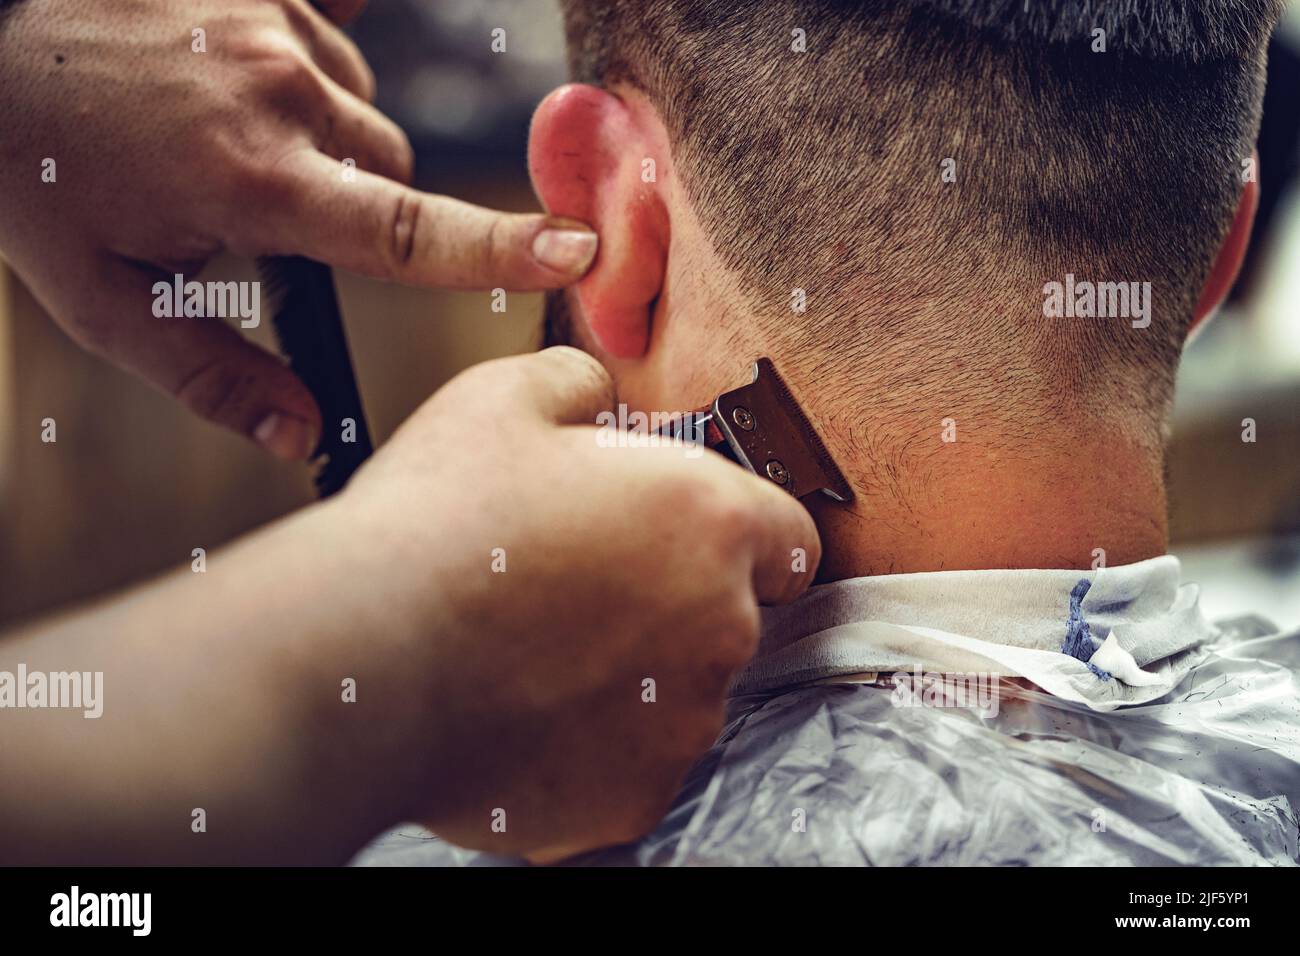 Barber guy gives a haircut to a bearded man sitting in a chair in a barbershop Stock Photo